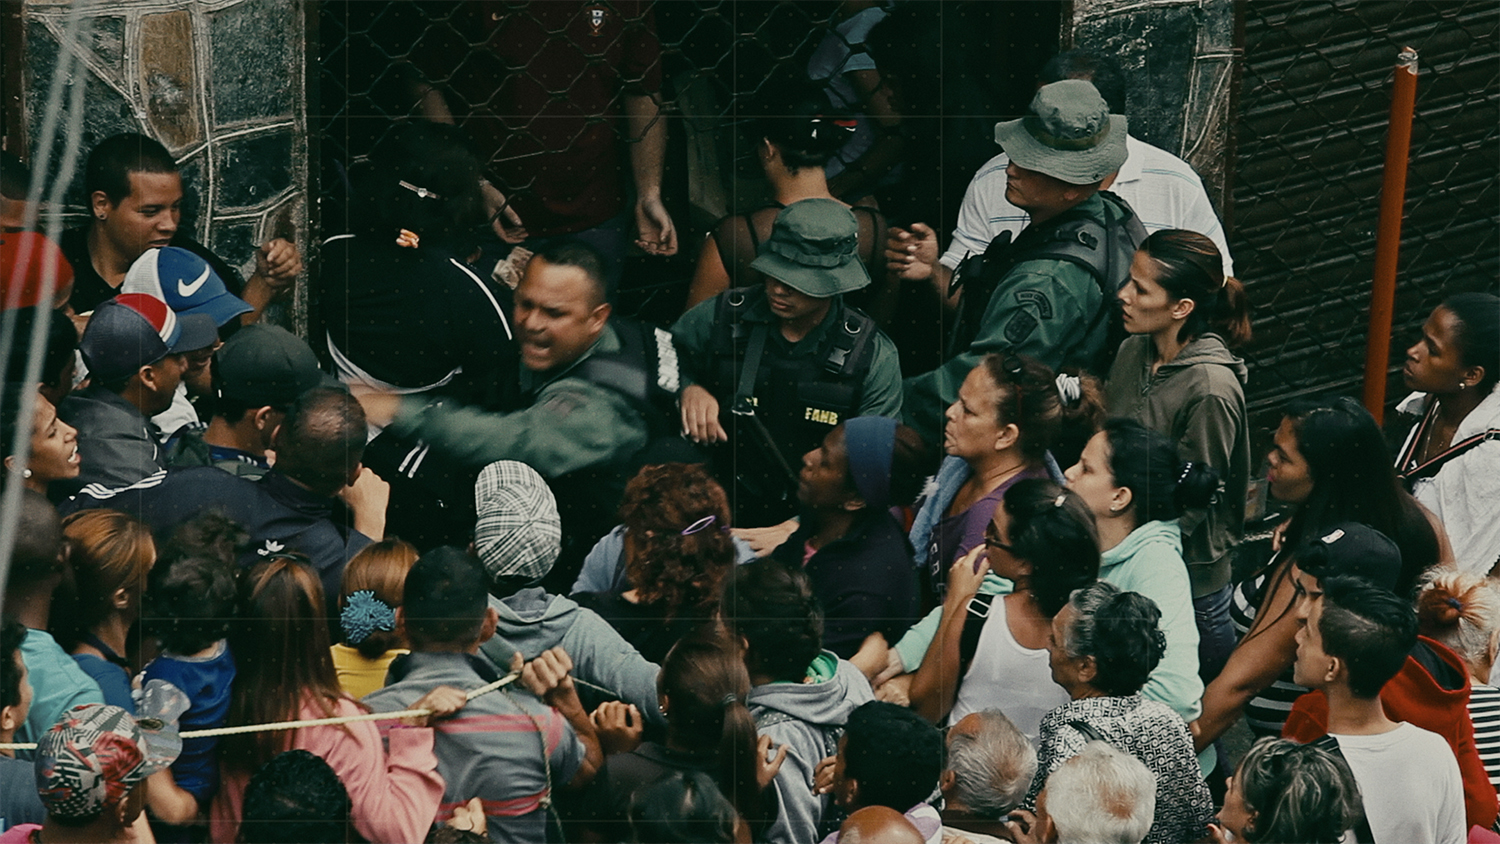 A scene of a crush of people, upset, yelling, some holding a rope line--its a food panic in Venezuela, year unknown